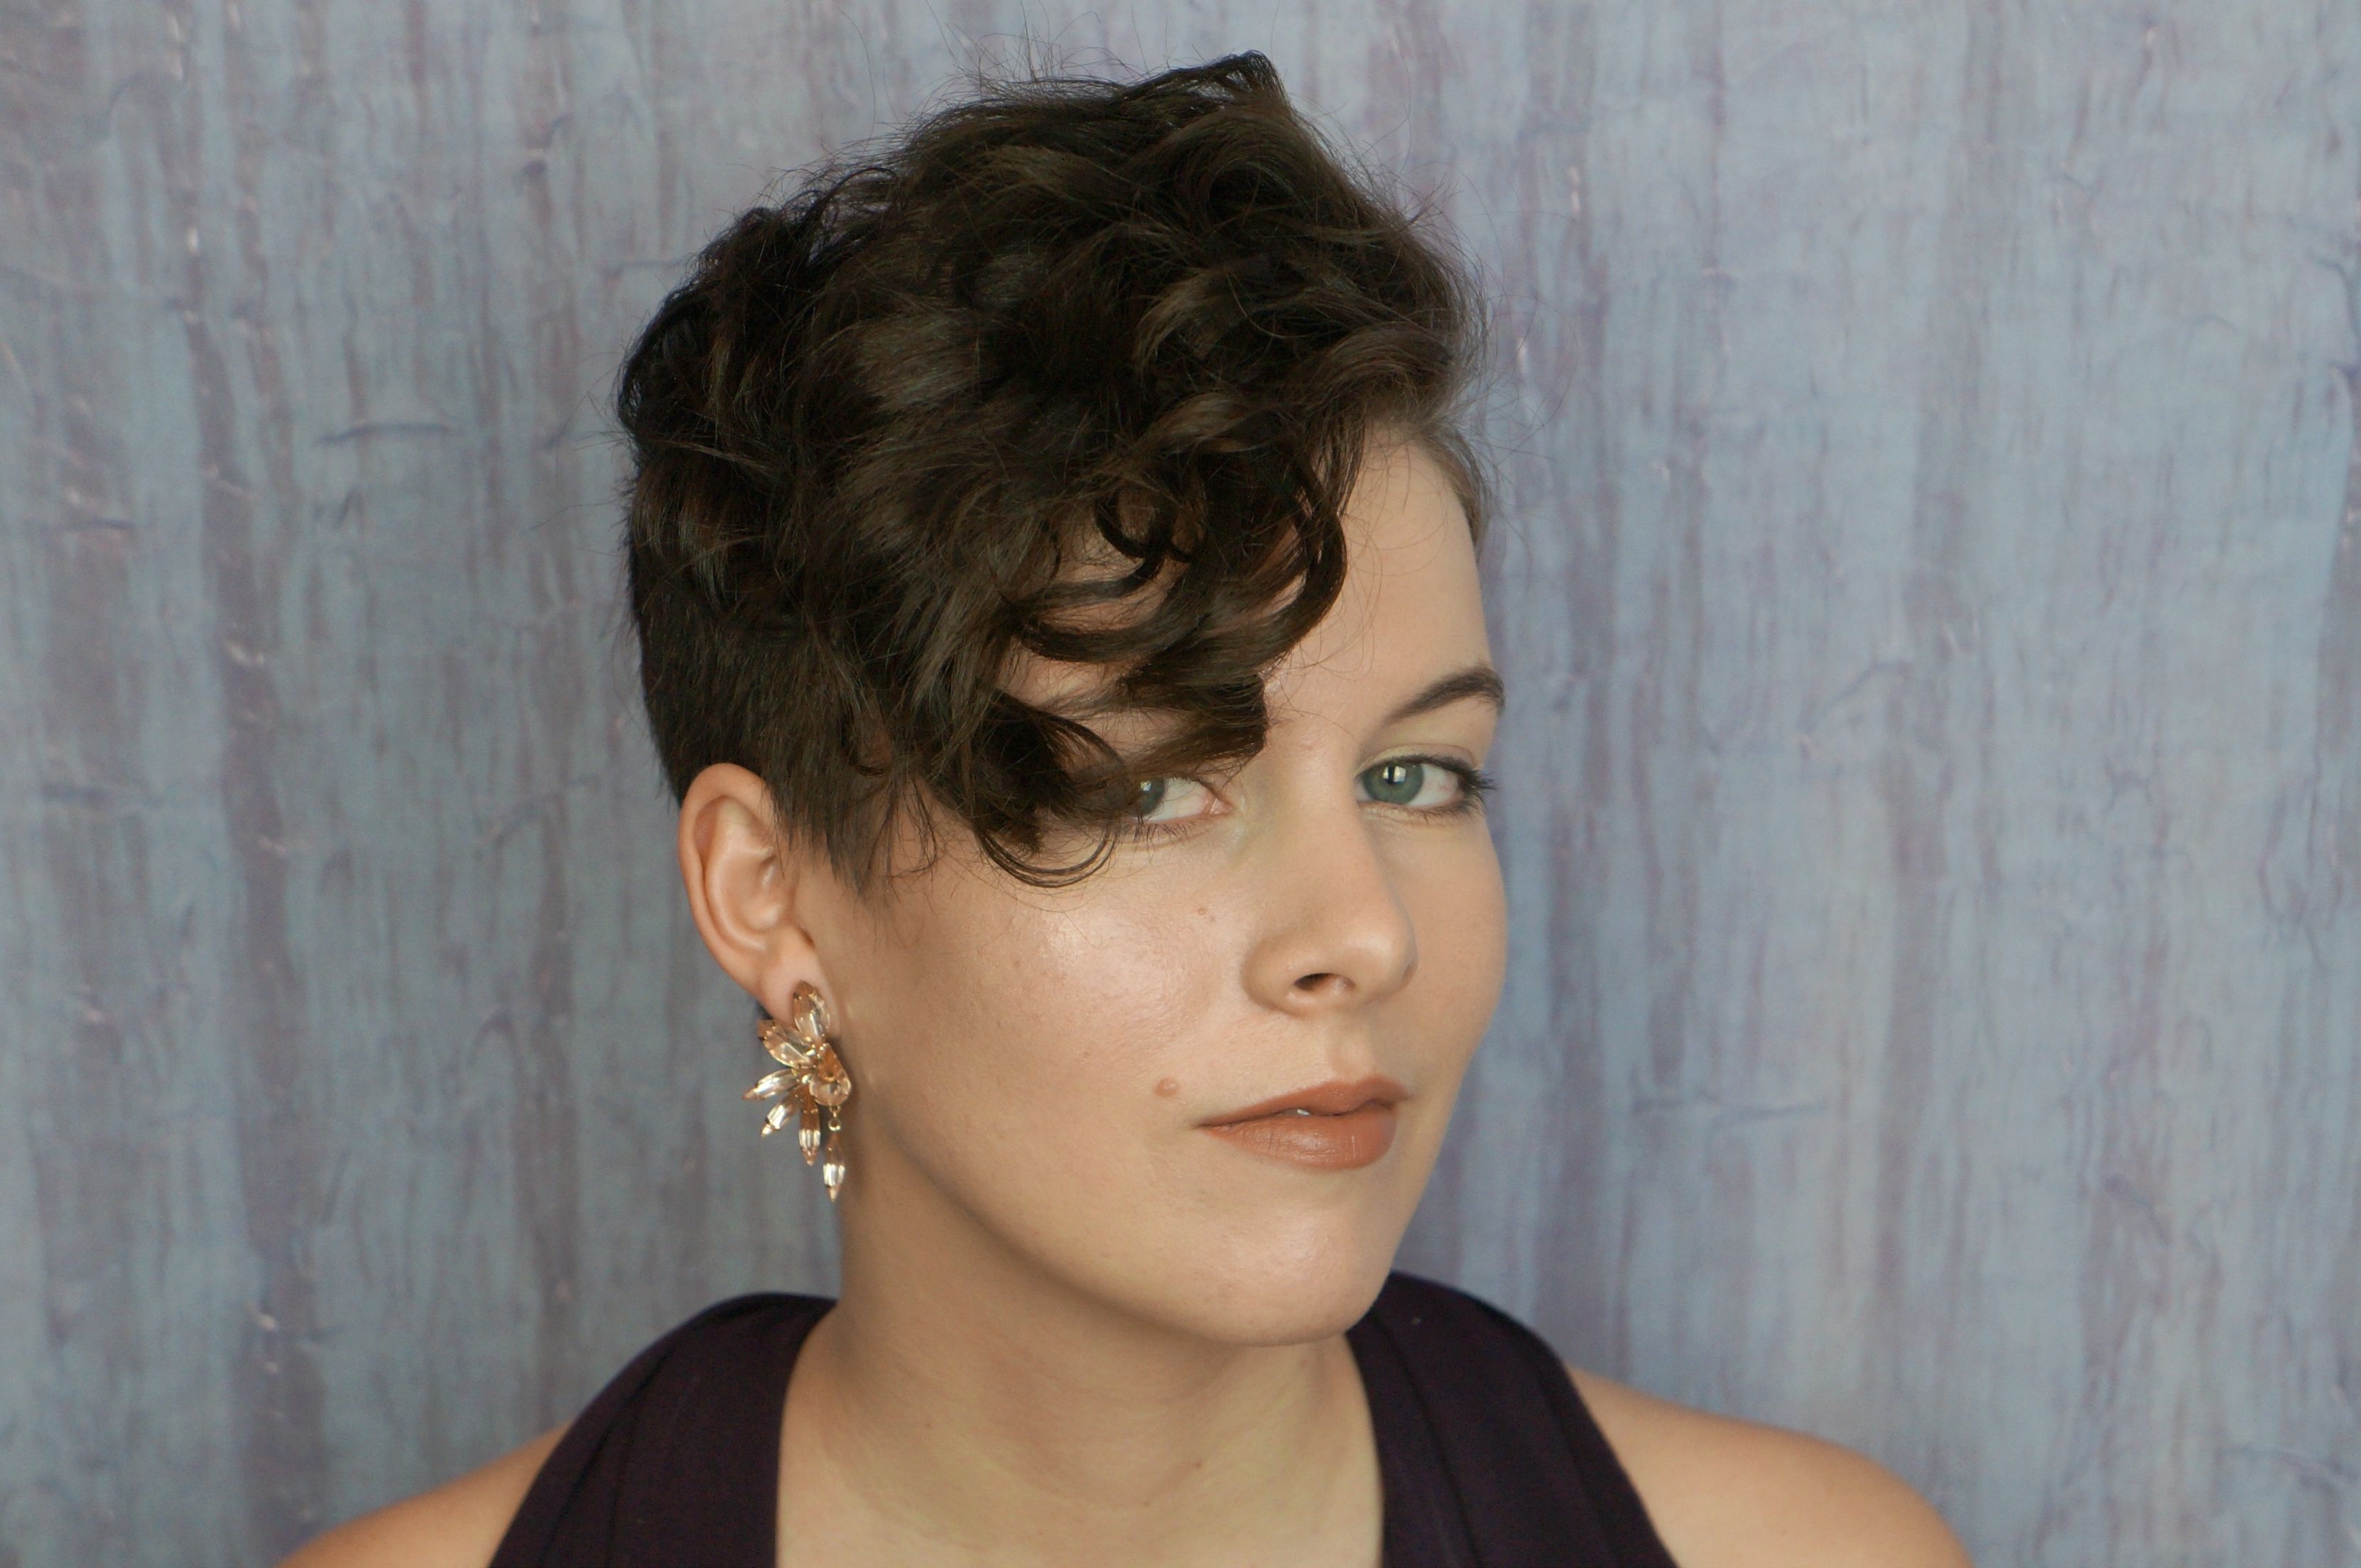 4 Short Hairstyles For Prom That Prove Pixie Cuts Can Be Extremely Glam Intended For Dinner Short Hairstyles (View 25 of 25)